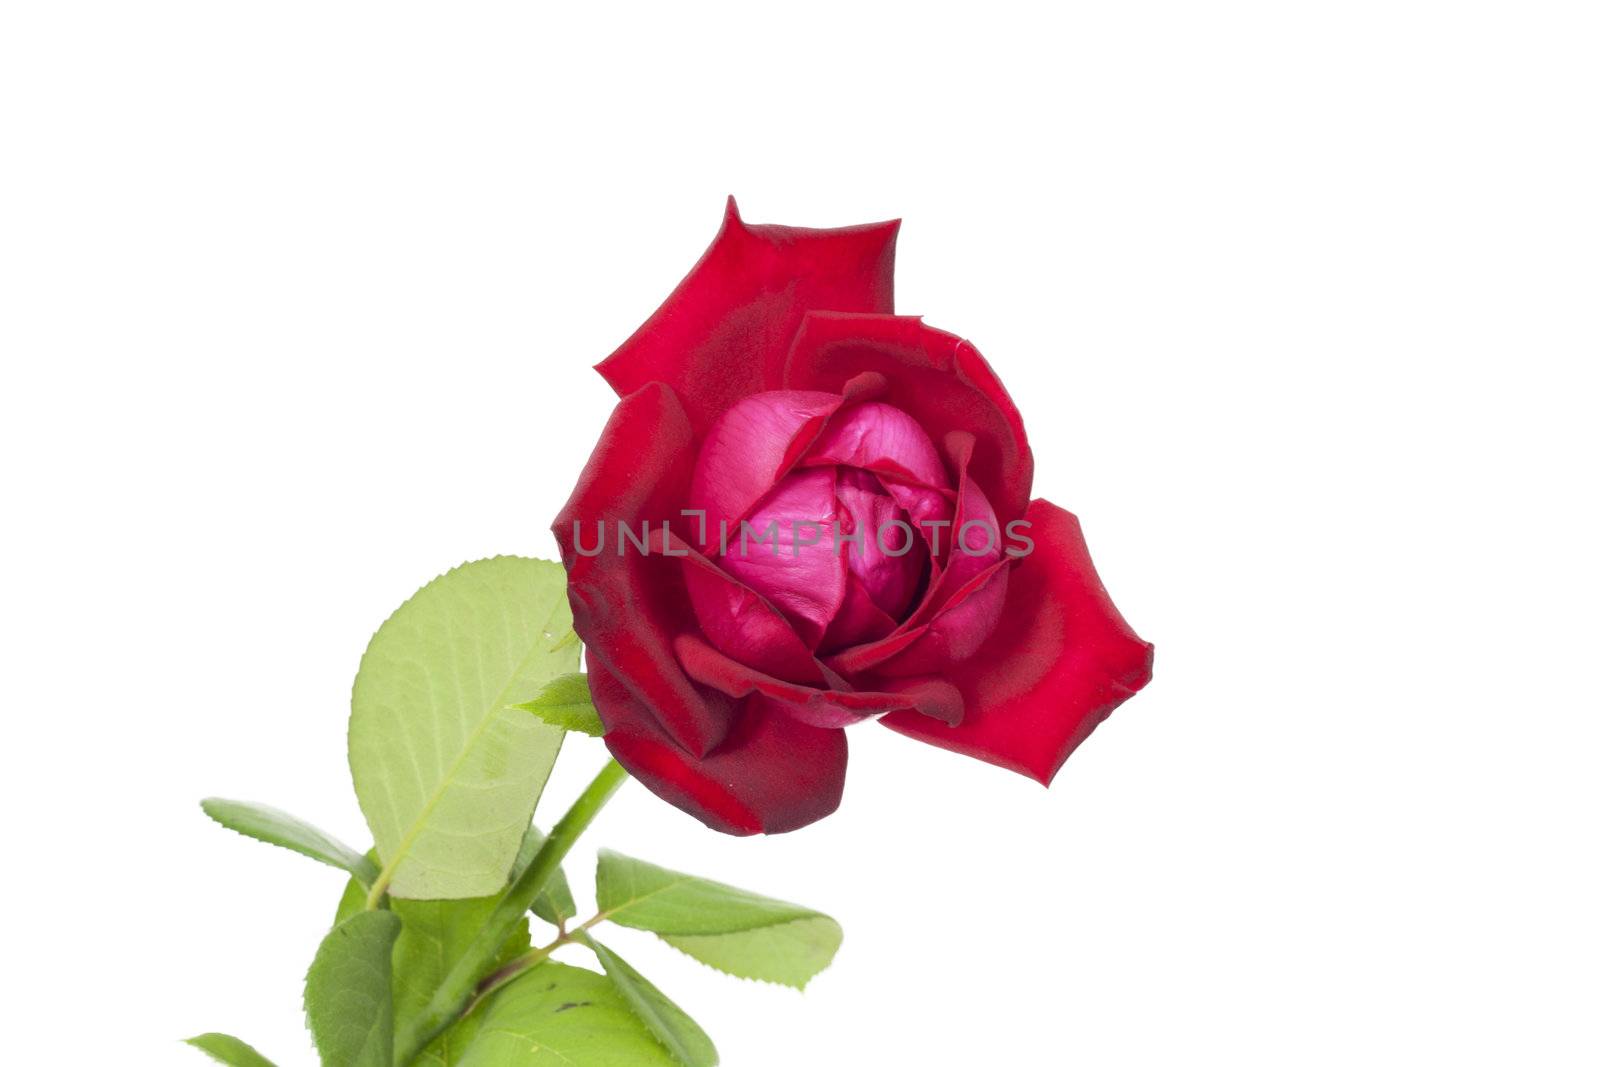 Red rose isolated on white background  by schankz